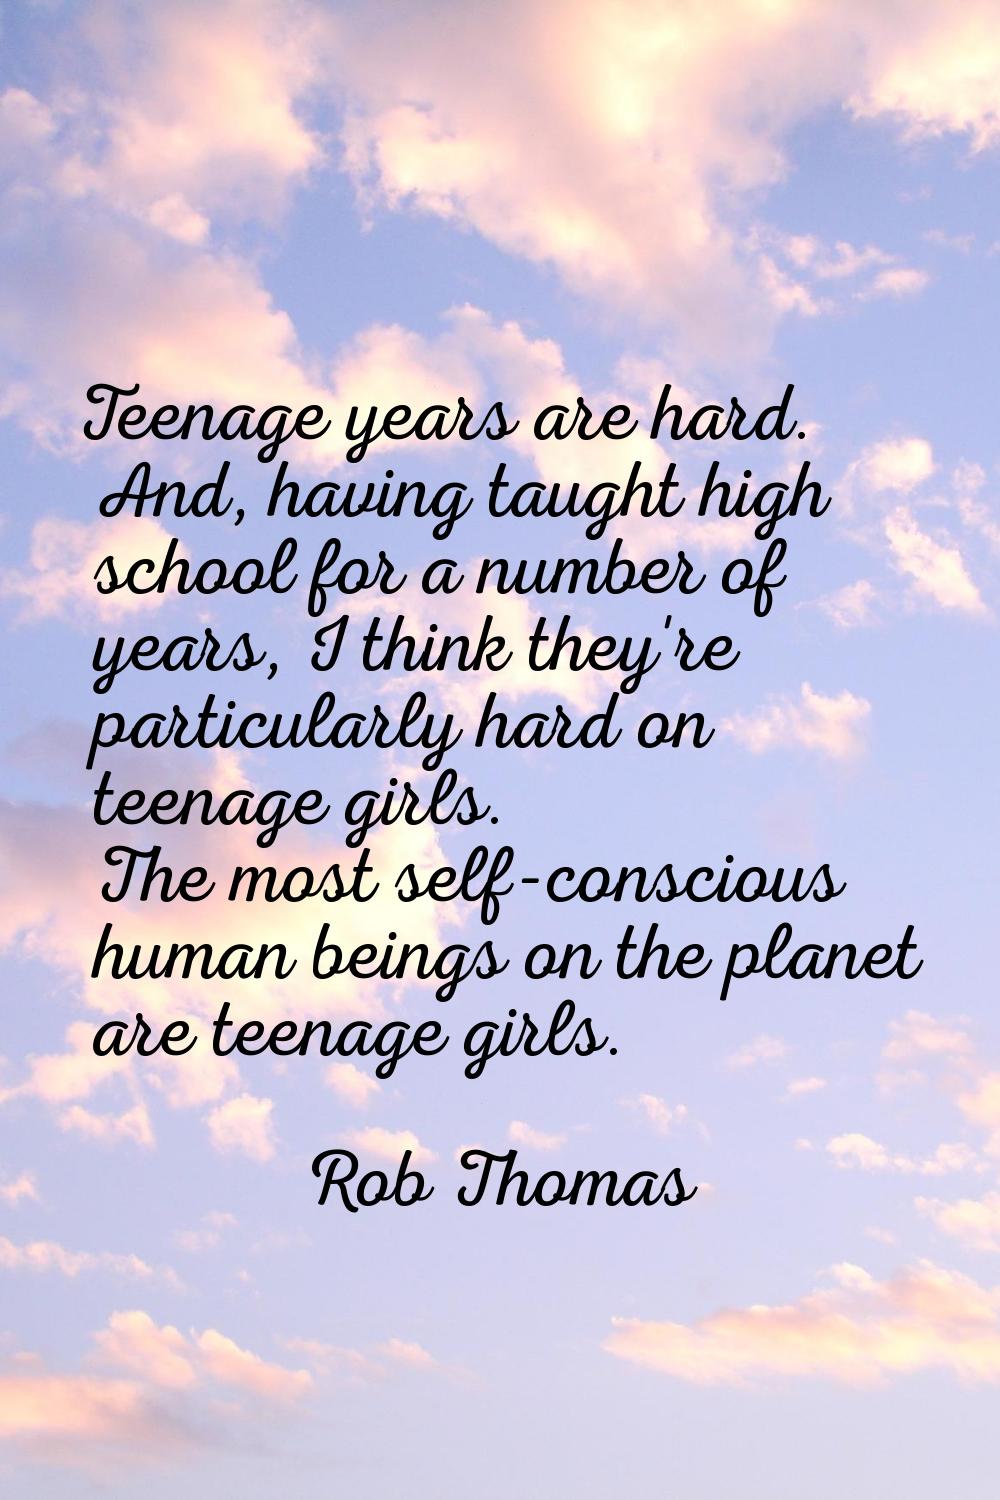 Teenage years are hard. And, having taught high school for a number of years, I think they're parti